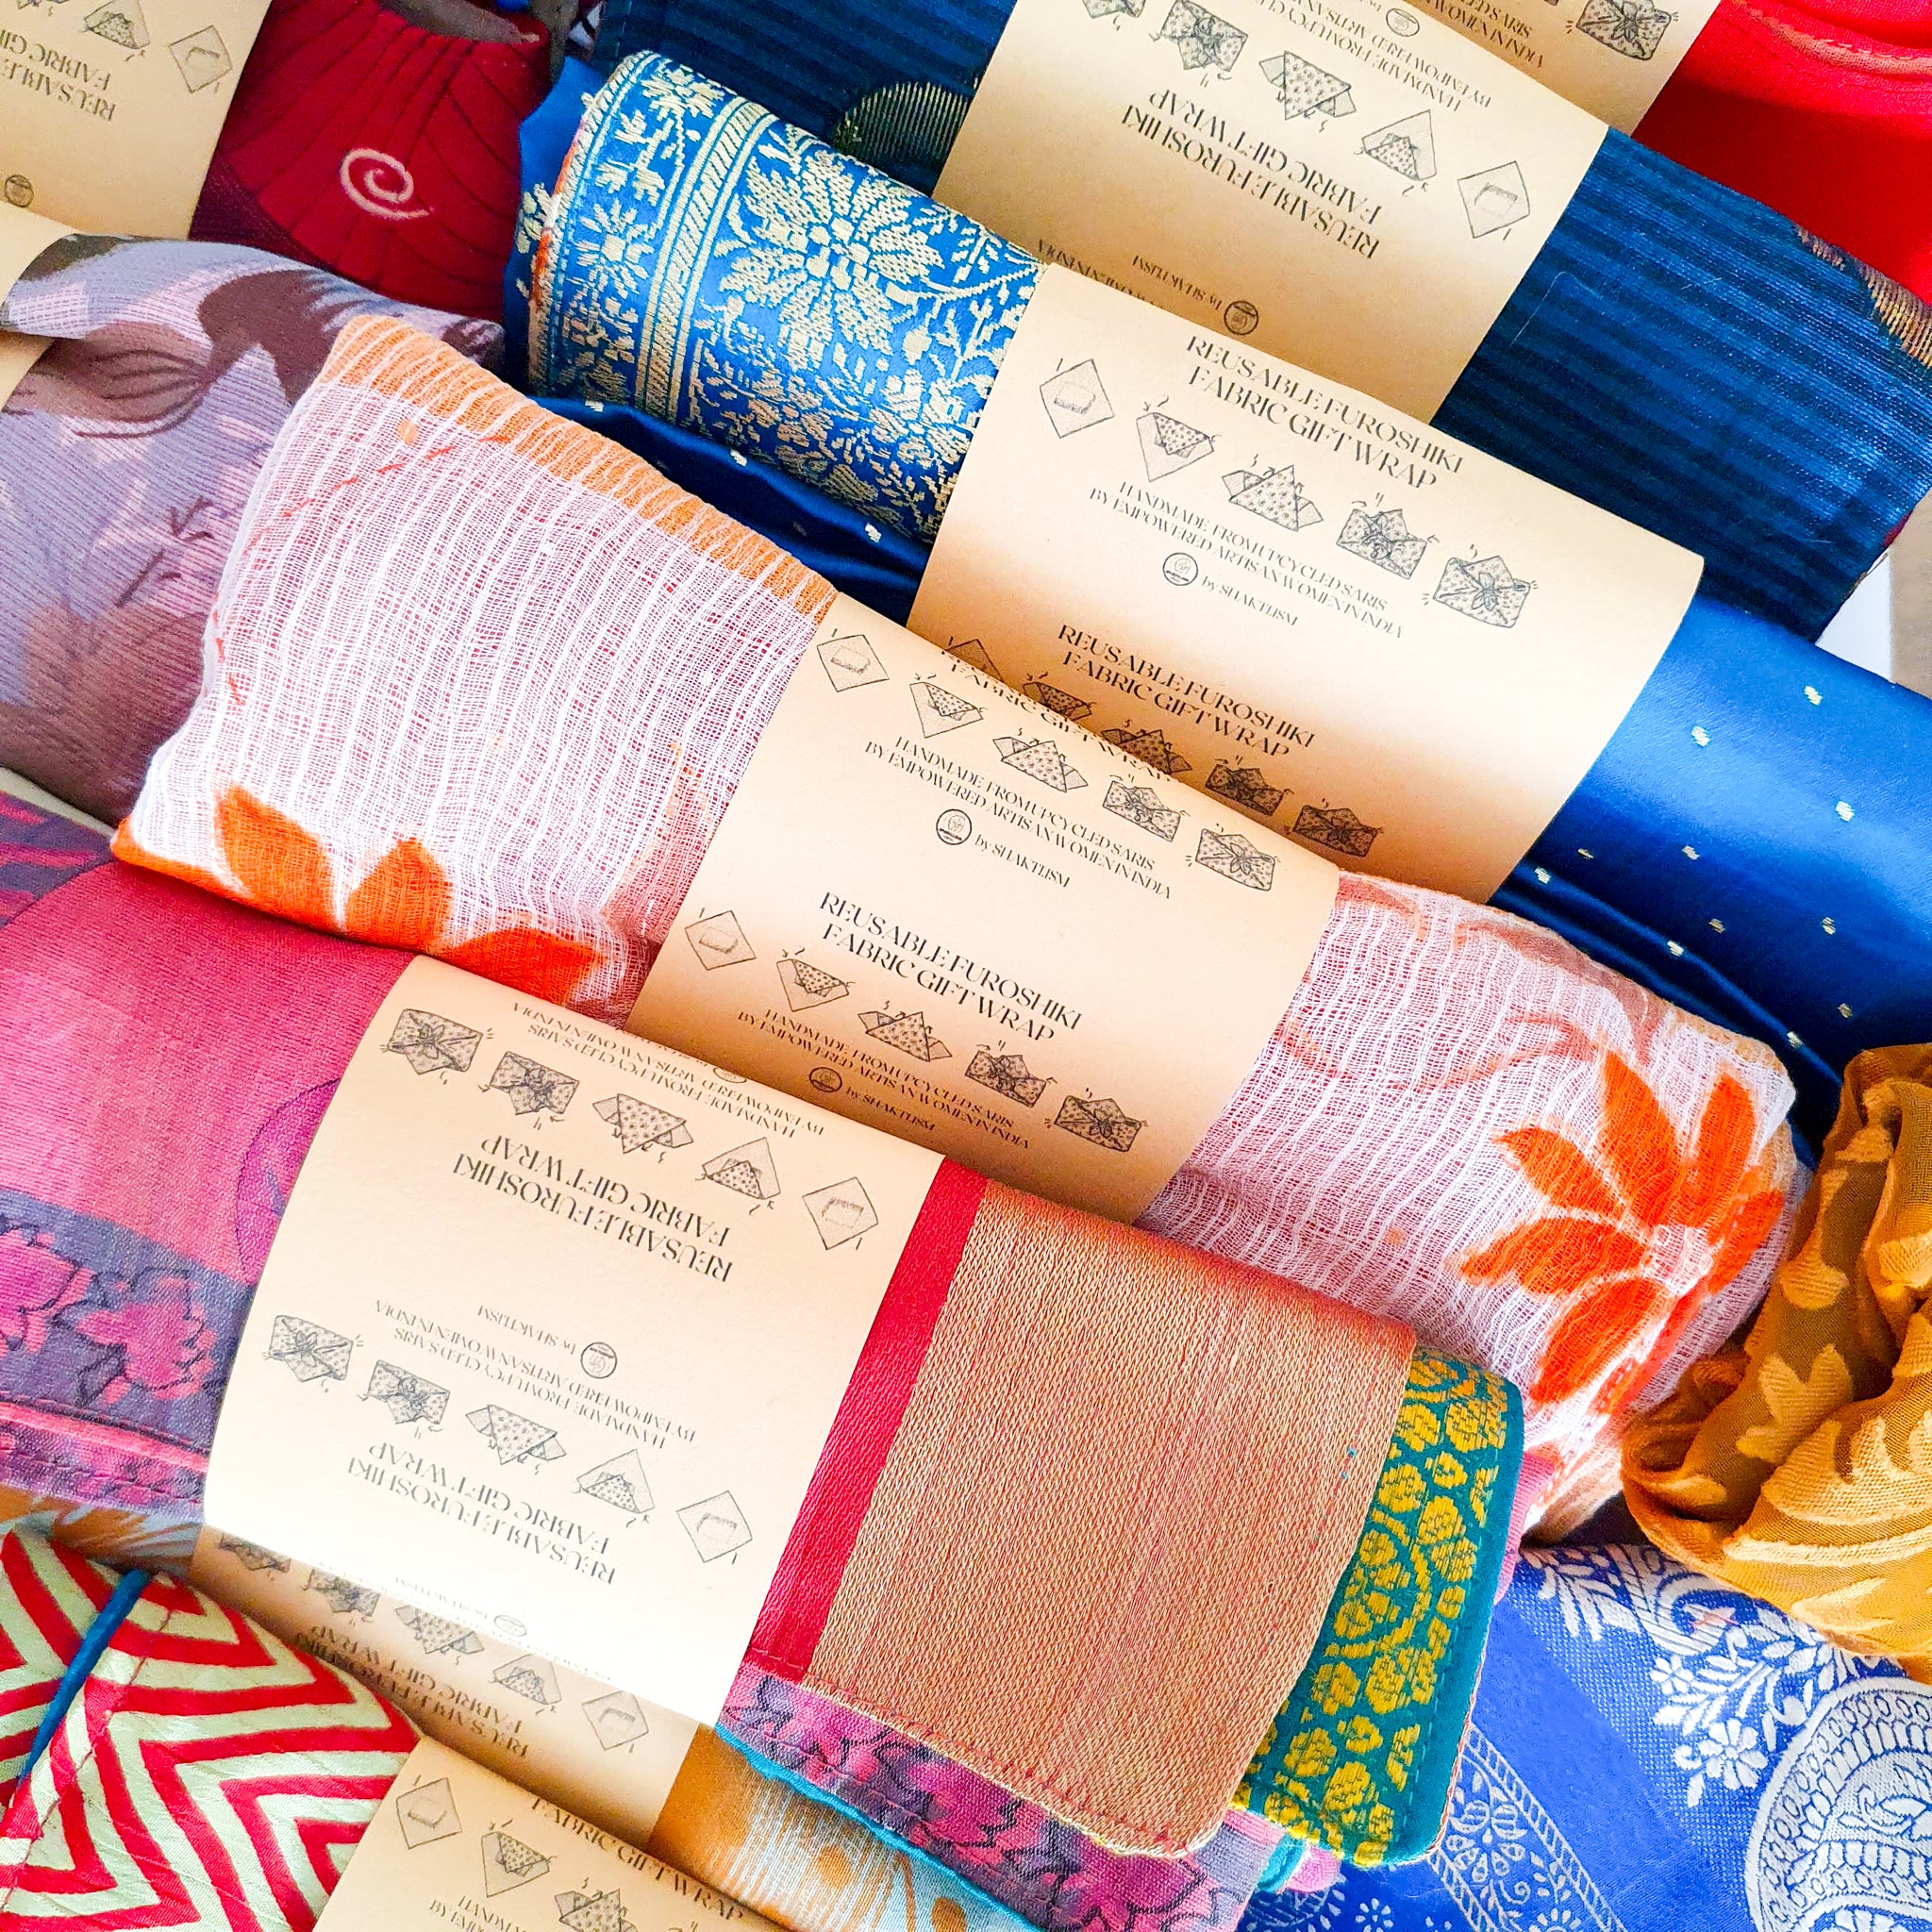 How You Can Reuse Vintage Sari Fabric for Home Decor - Nomadic